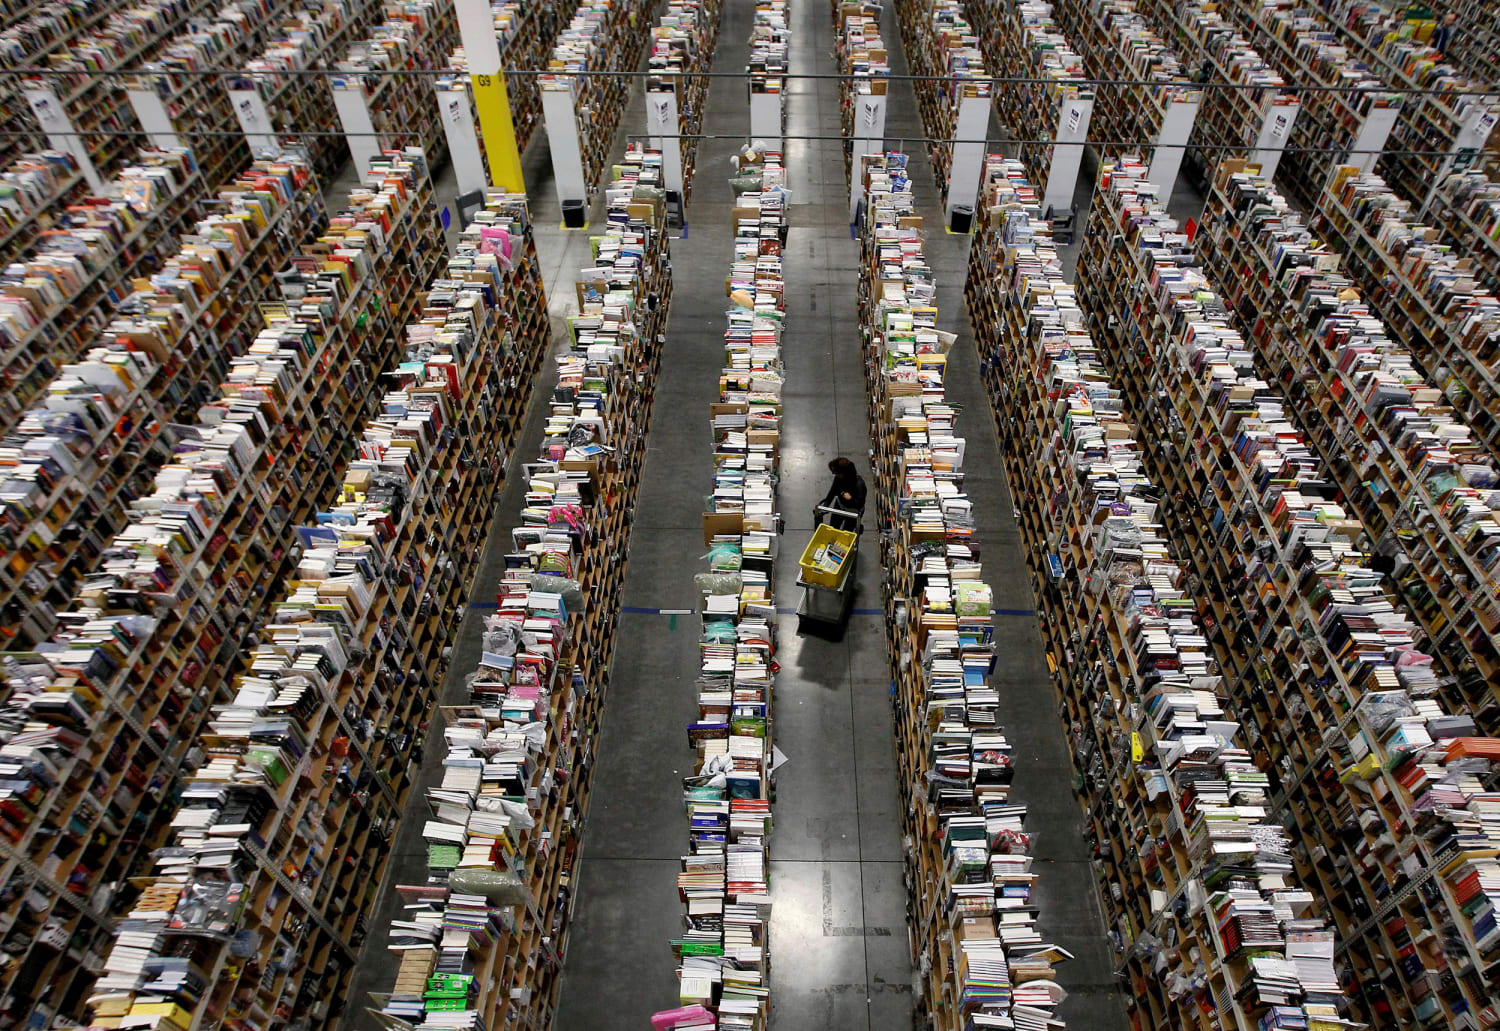 Amazon's largest warehouse hub has a coronavirus case. Workers say changes  need to be made.